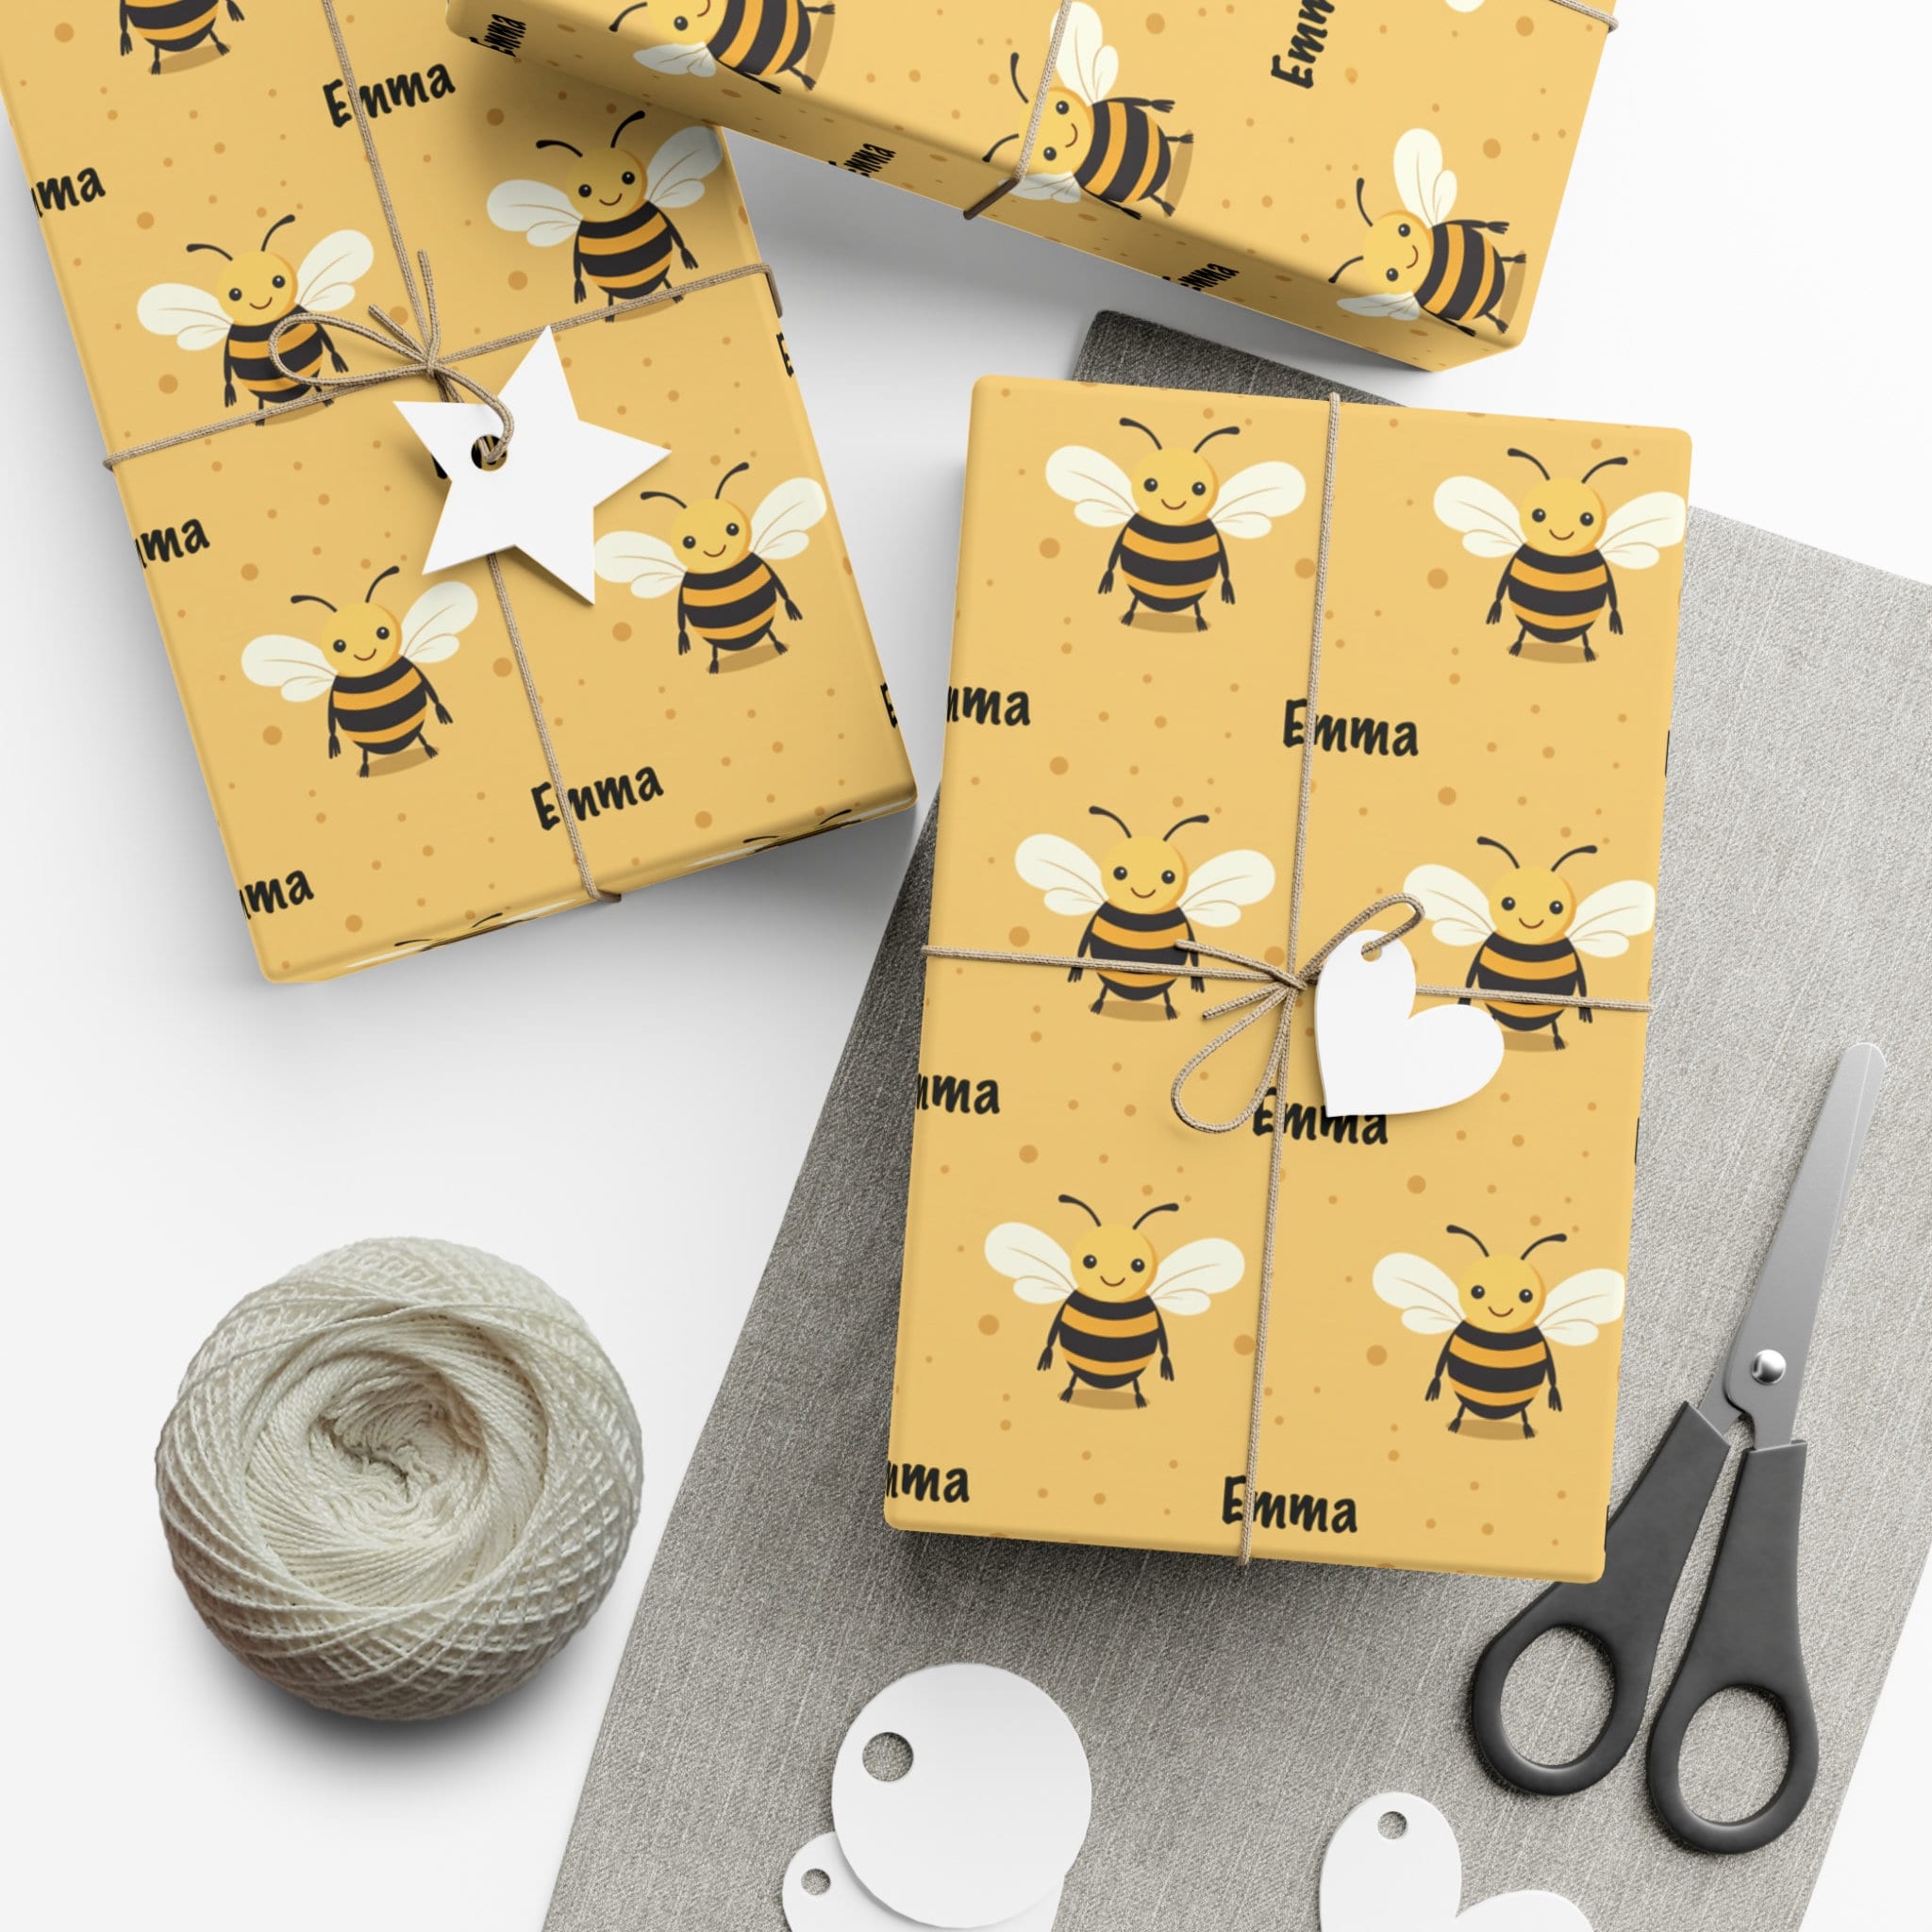 Bee Bumblebee Honeycomb Wrapping Paper Gift Wrap 48 In (4 Feet) x 30 Inches  New